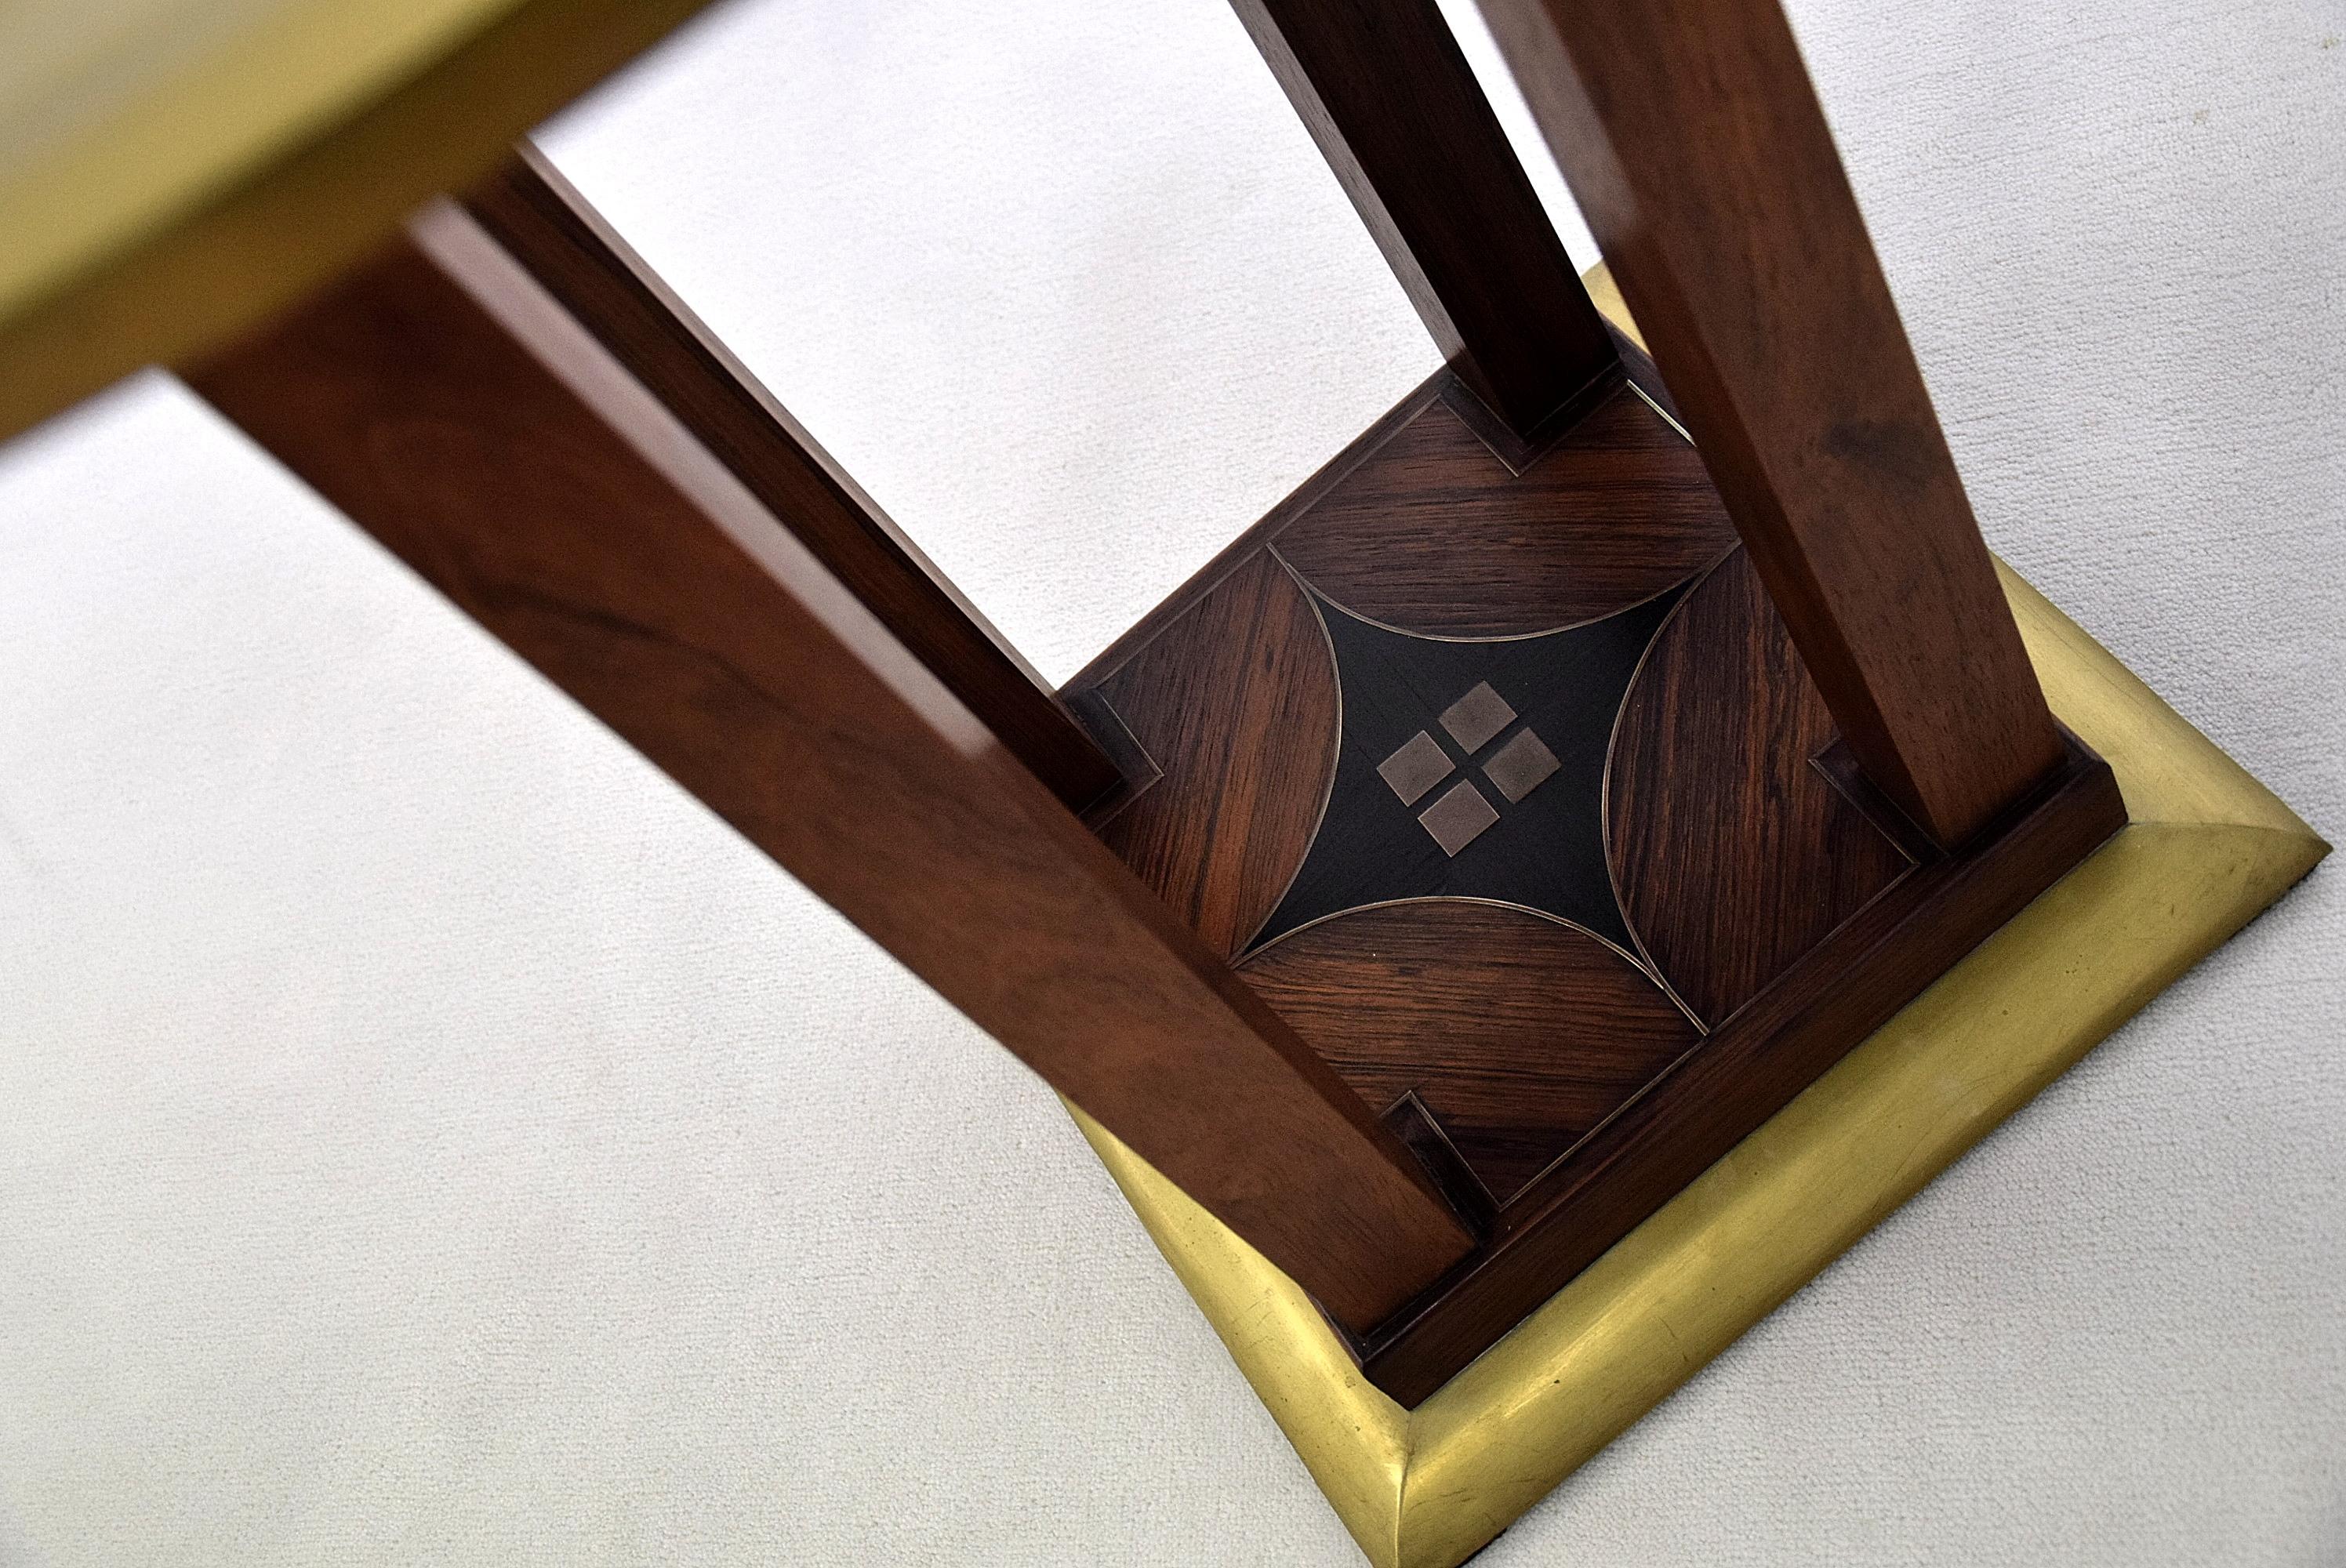 Rosewood, ebony and brass Art Deco side table with beautiful details in the base as can be seen in the images.

This stunning piece of Dutch Art Deco was made in the early 1930s.

Measurements: D.60 x H.67.5 cm.

The table will be shipped